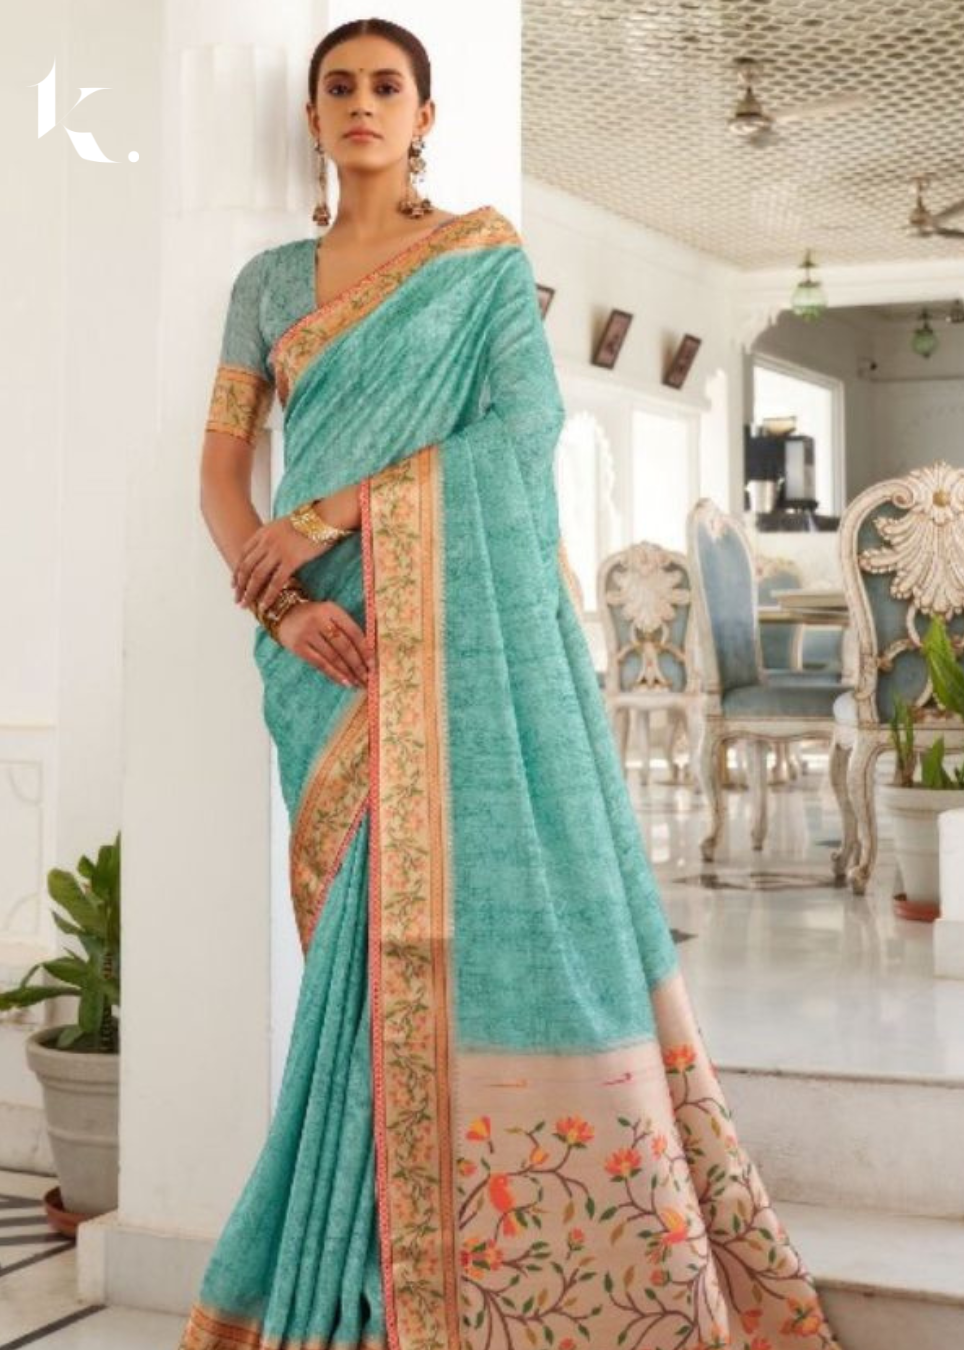 Sky Blue Imported Fabric Self Design Border Digital Printed Daily and Casual Wear Saree - Ikonikbez